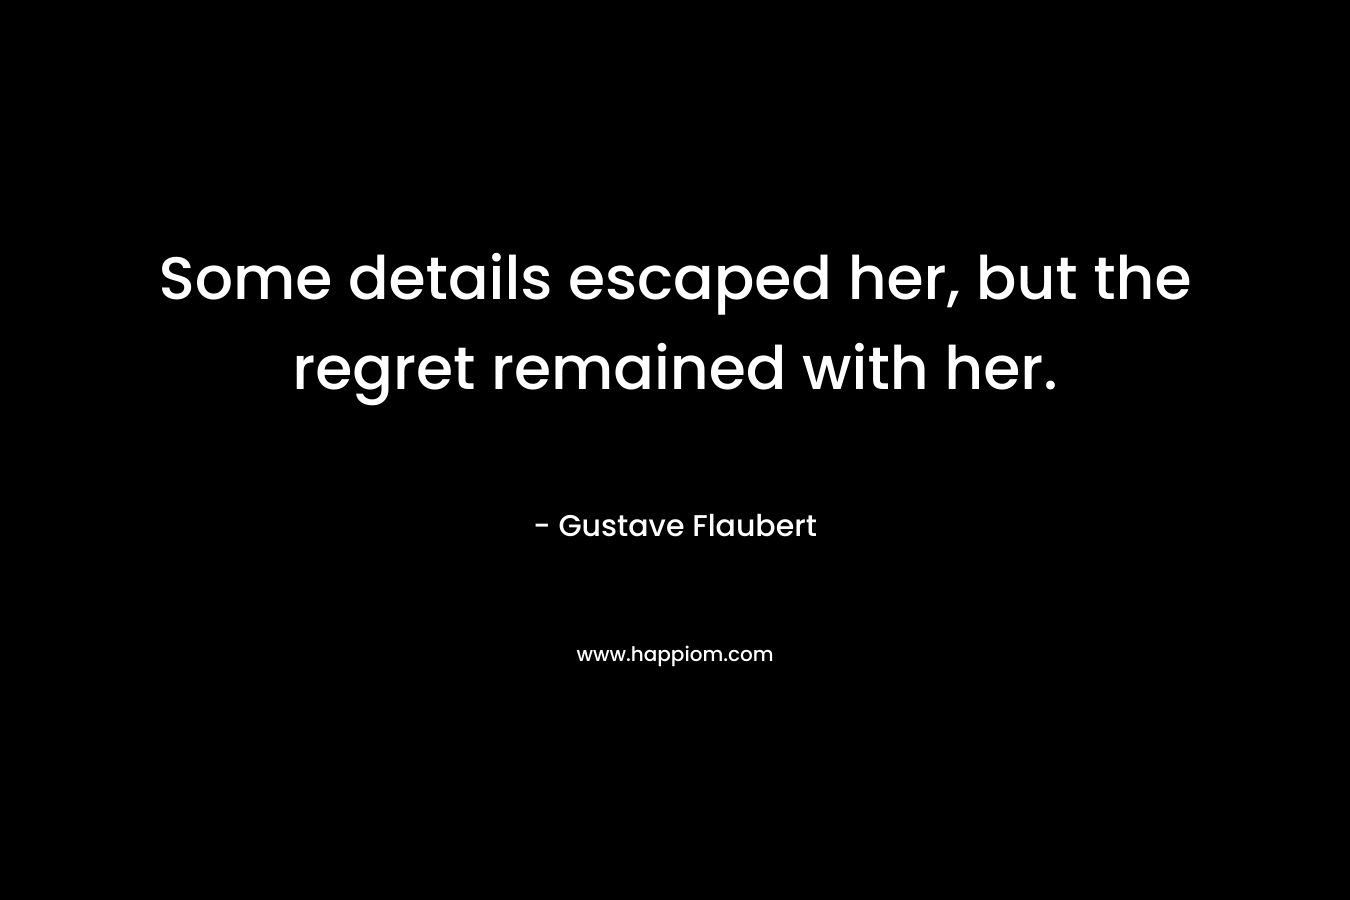 Some details escaped her, but the regret remained with her. – Gustave Flaubert